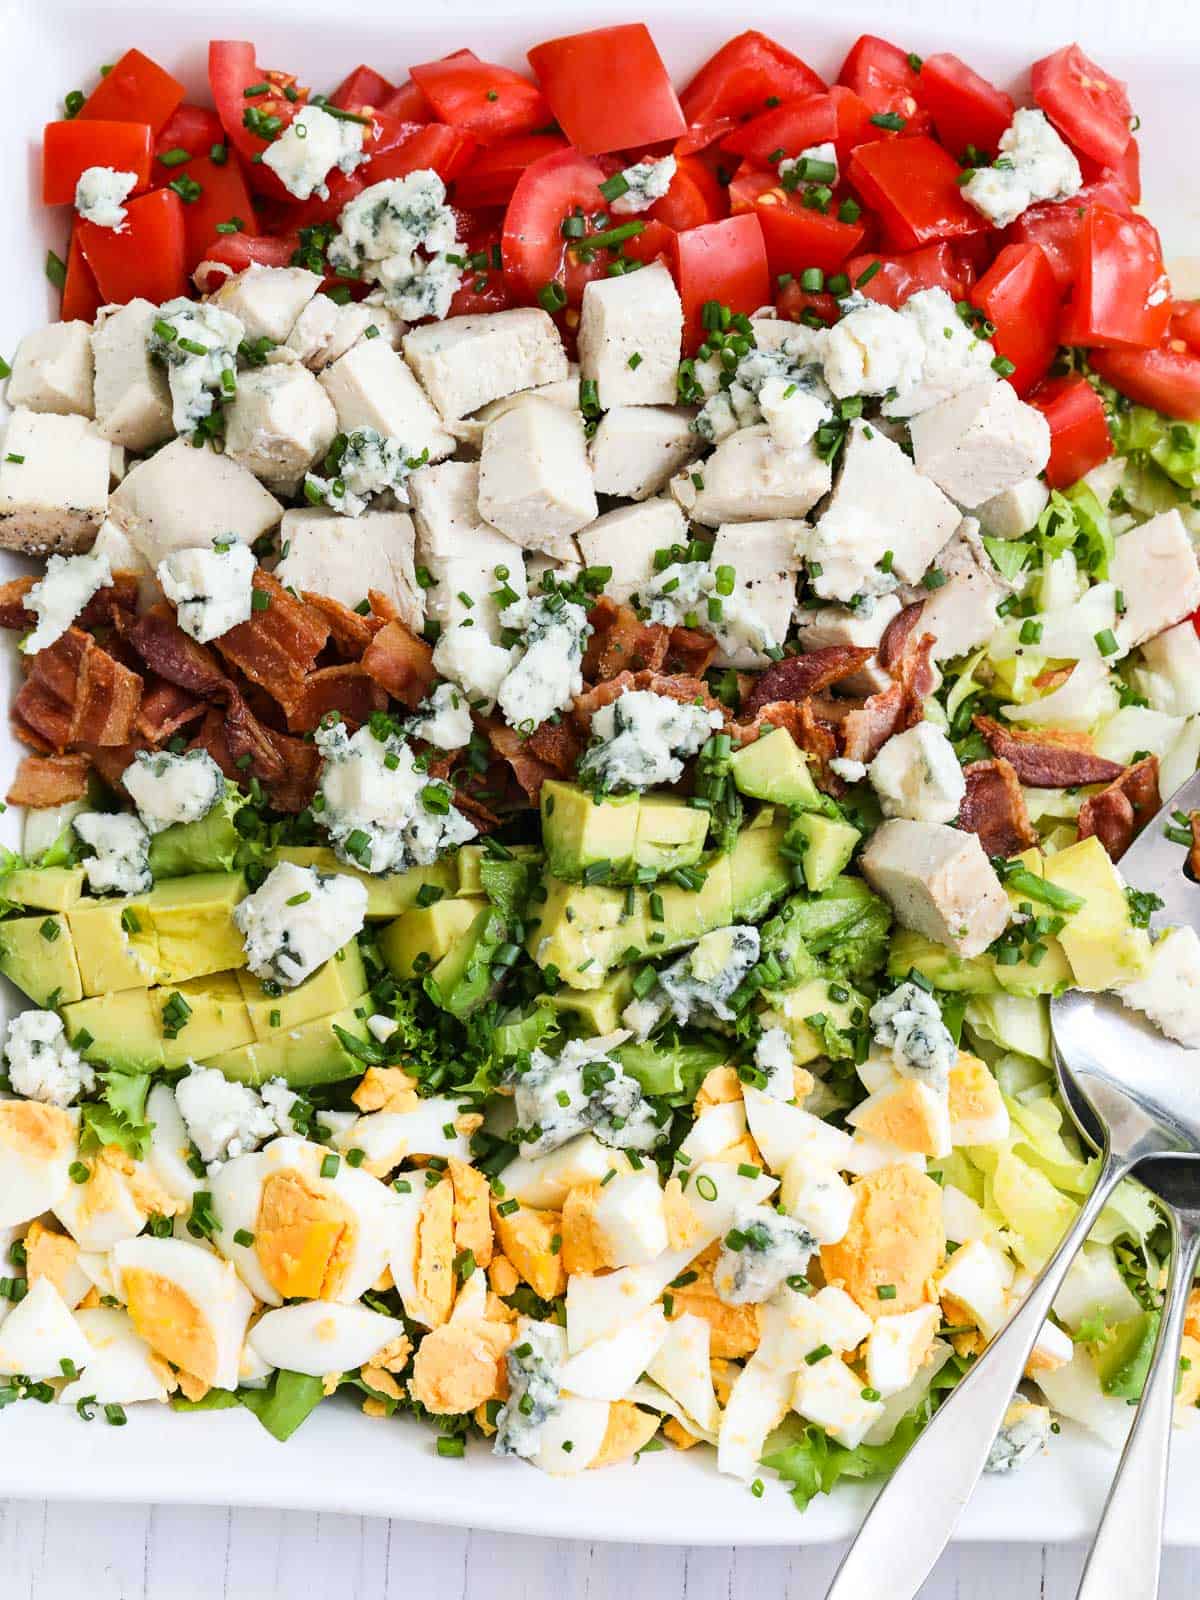 A layered cobb salad with veggies, cheese and chicken.